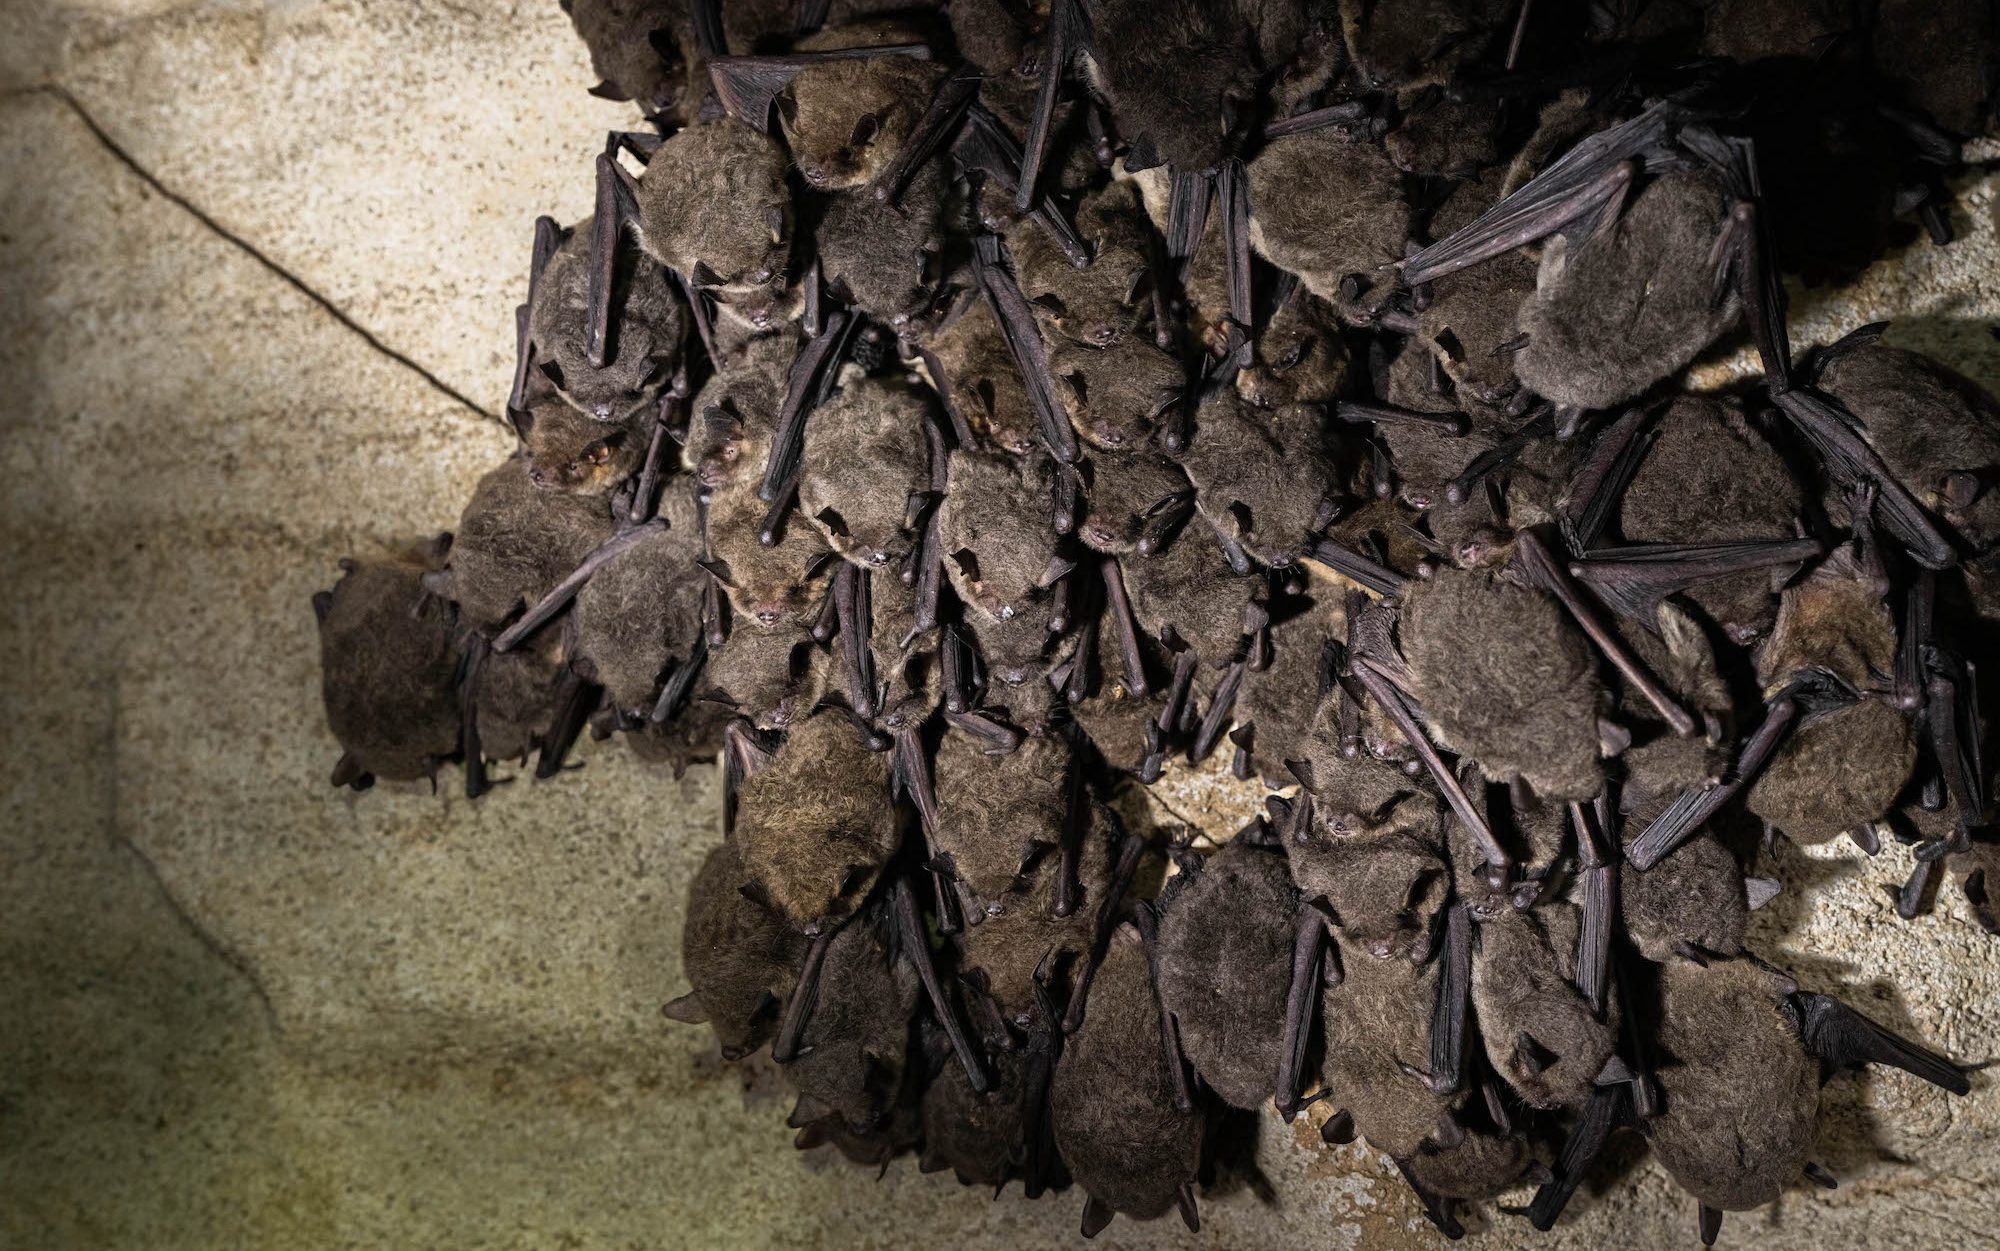 close upof bats huddled on cave wall